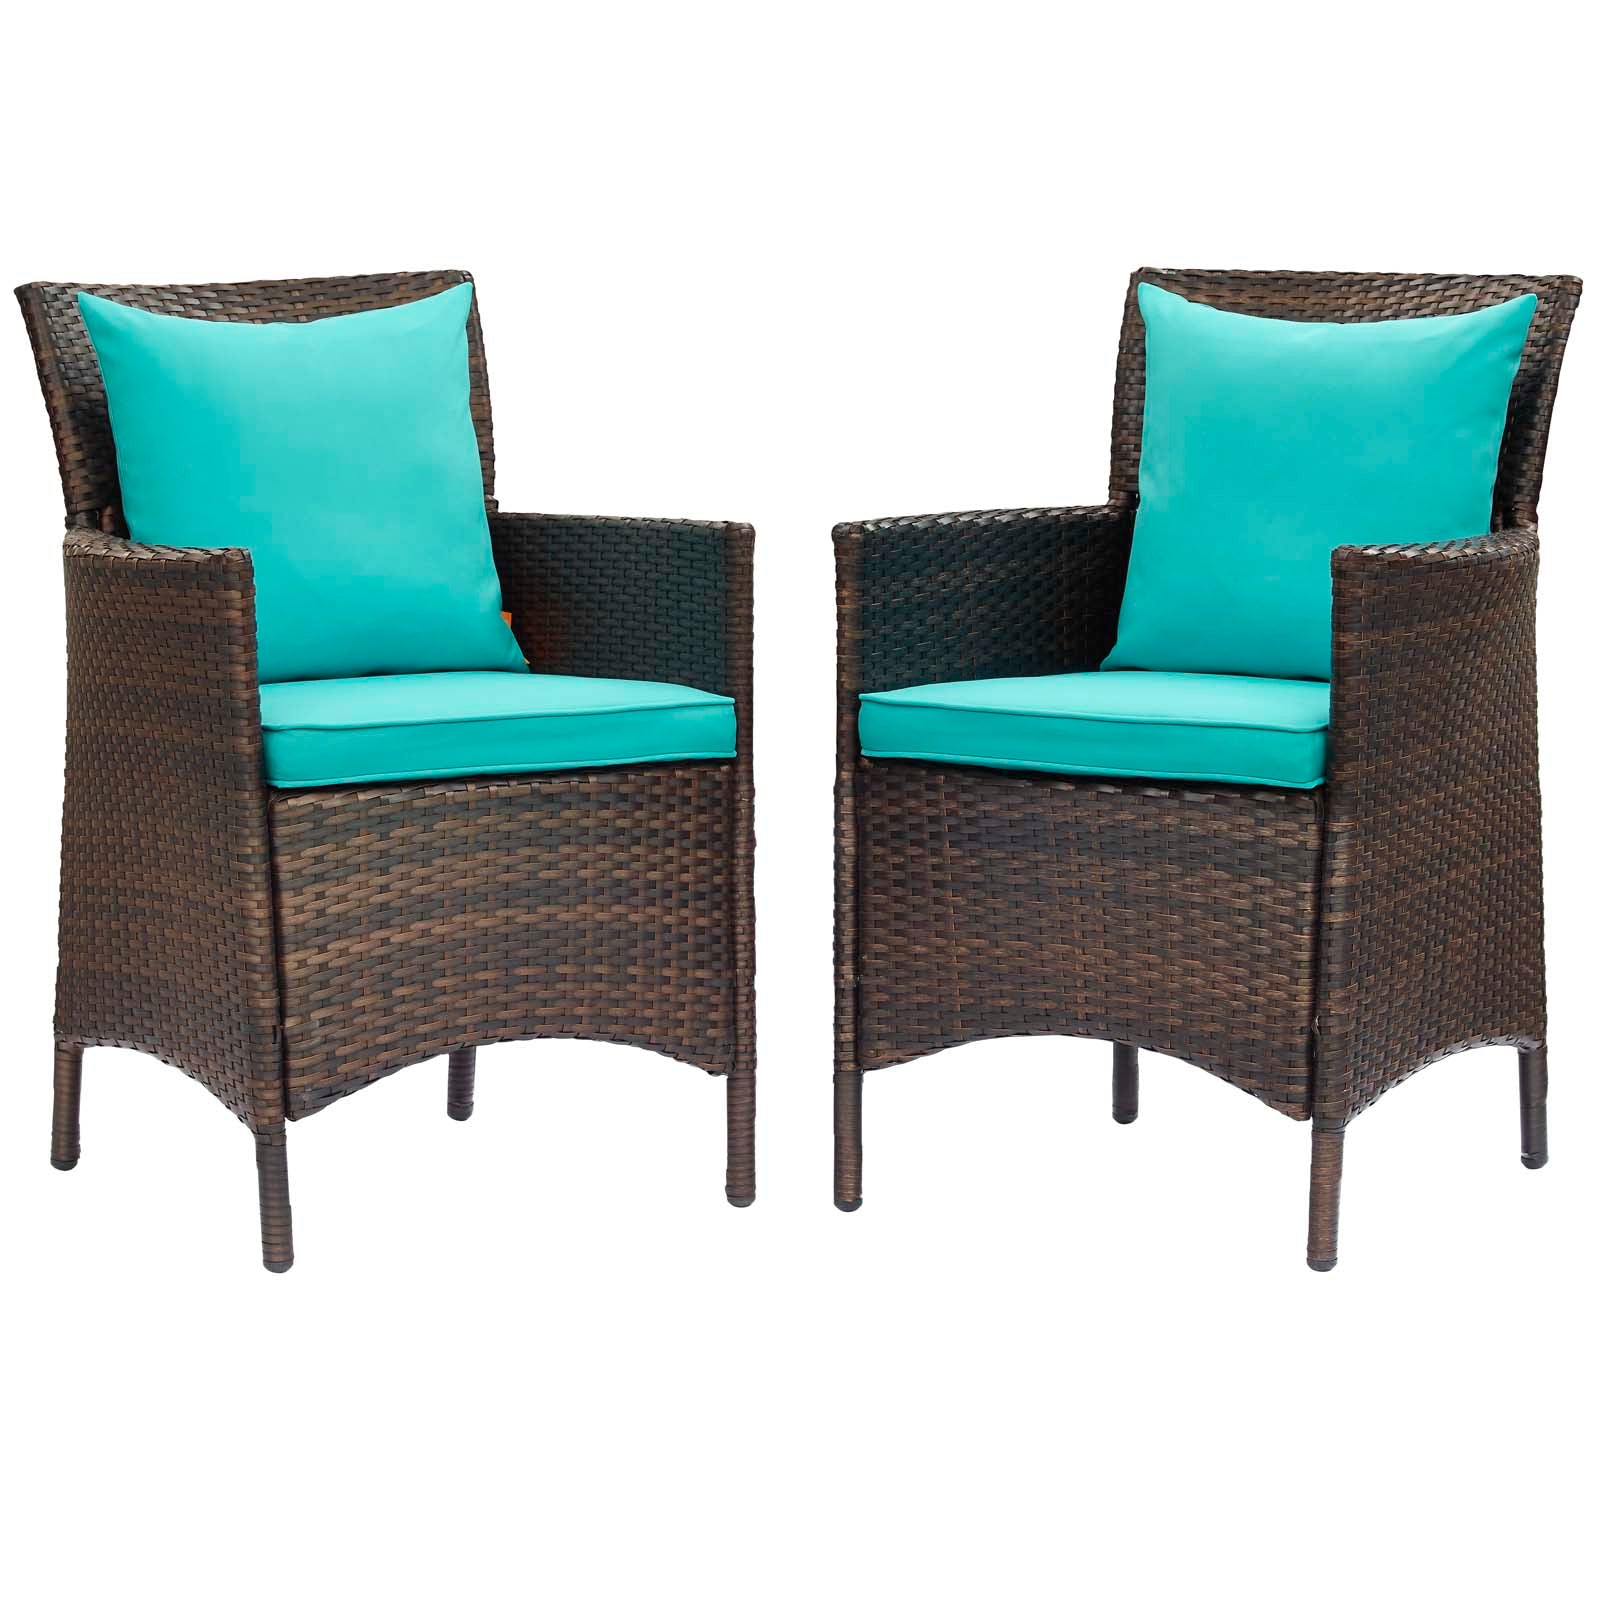 Modway Outdoor Dining Chairs - Conduit Outdoor Patio Wicker Rattan Dining Armchair Set of 2 Brown Turquoise